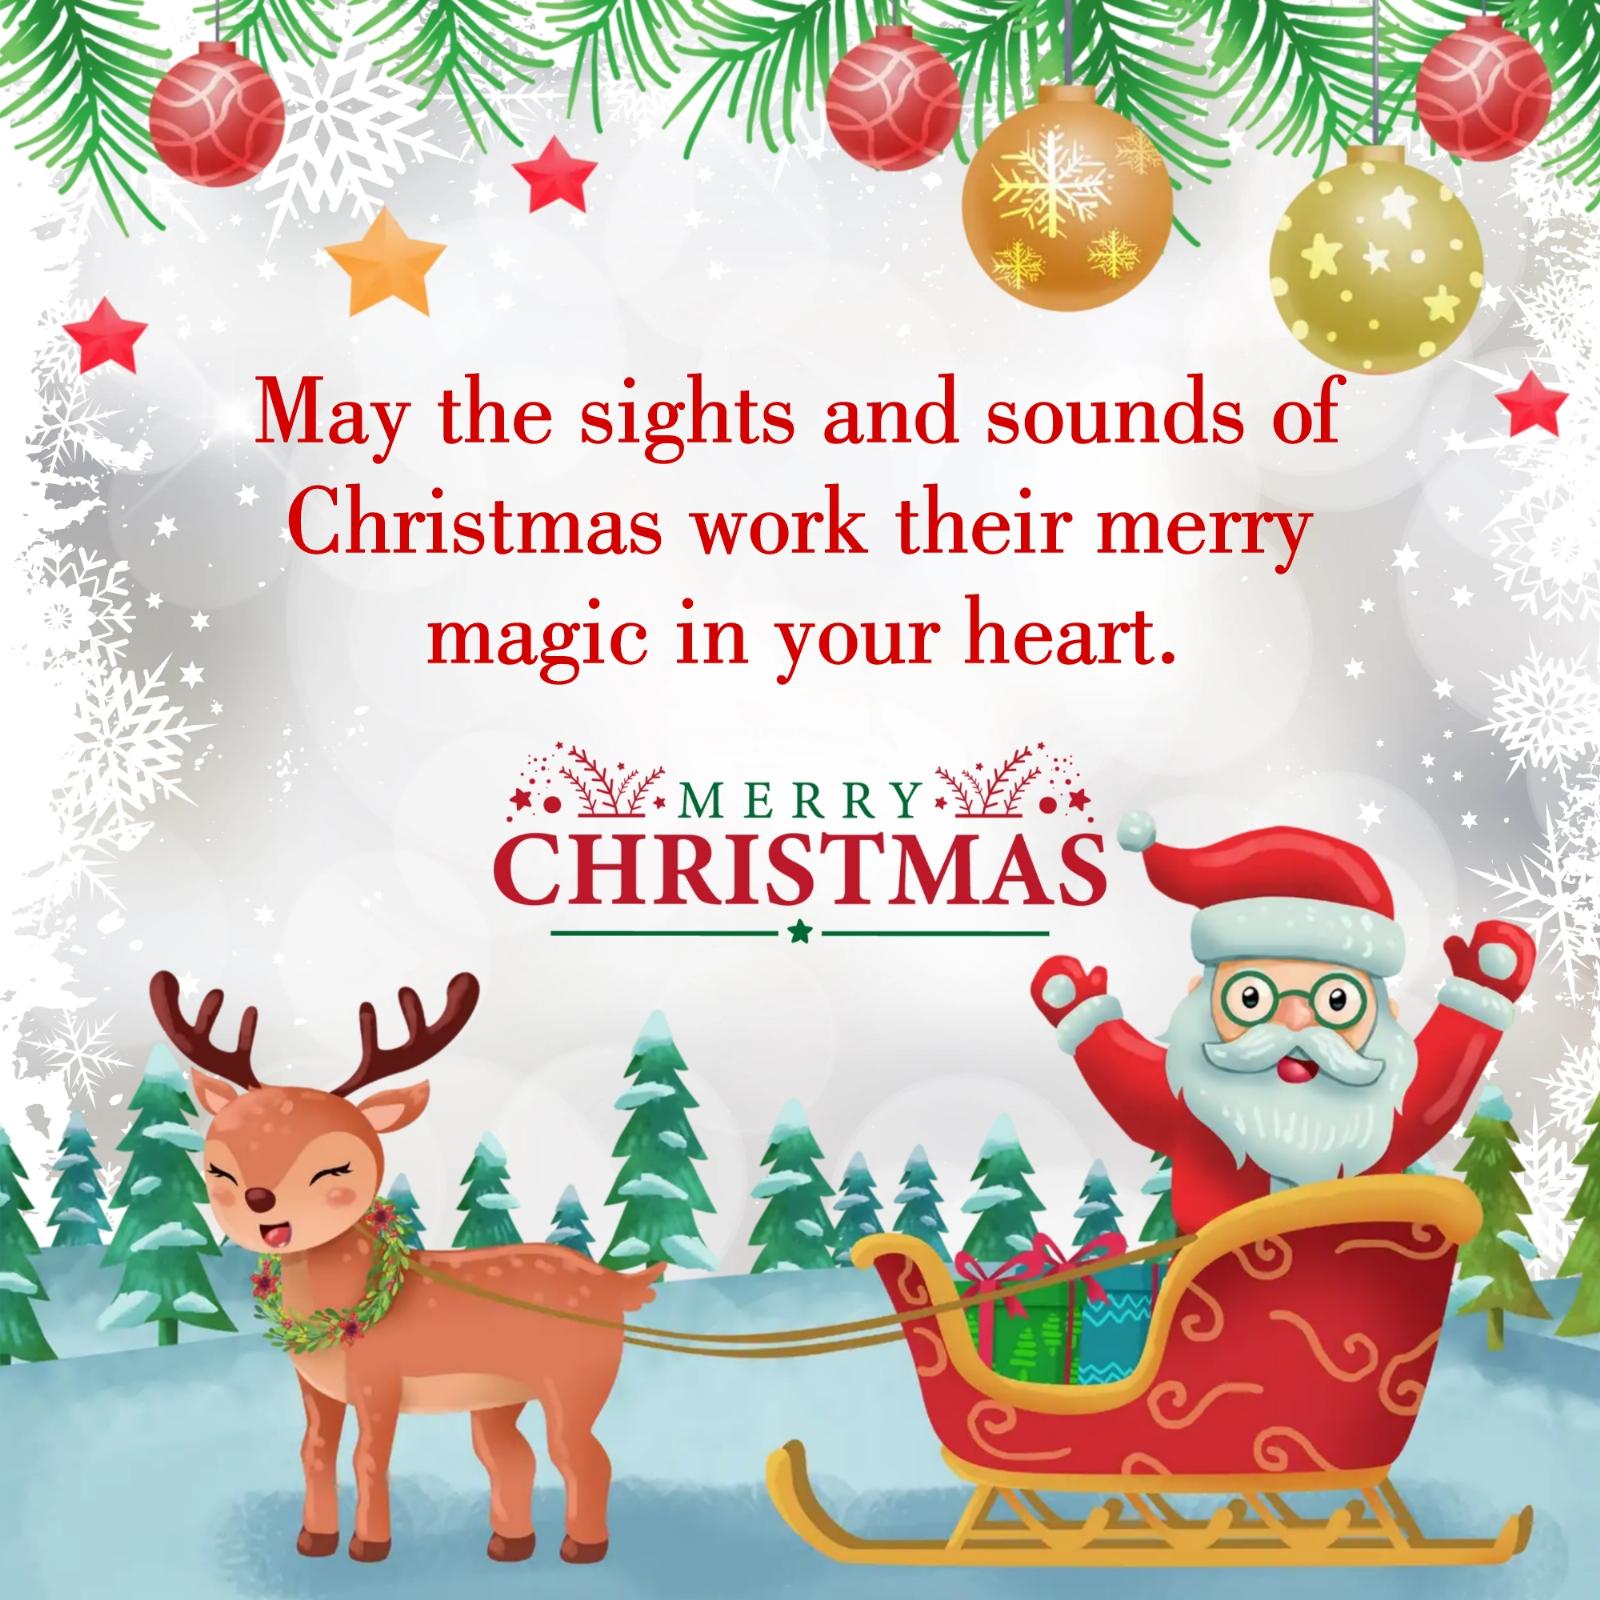 May the sights and sounds of Christmas work their merry magic